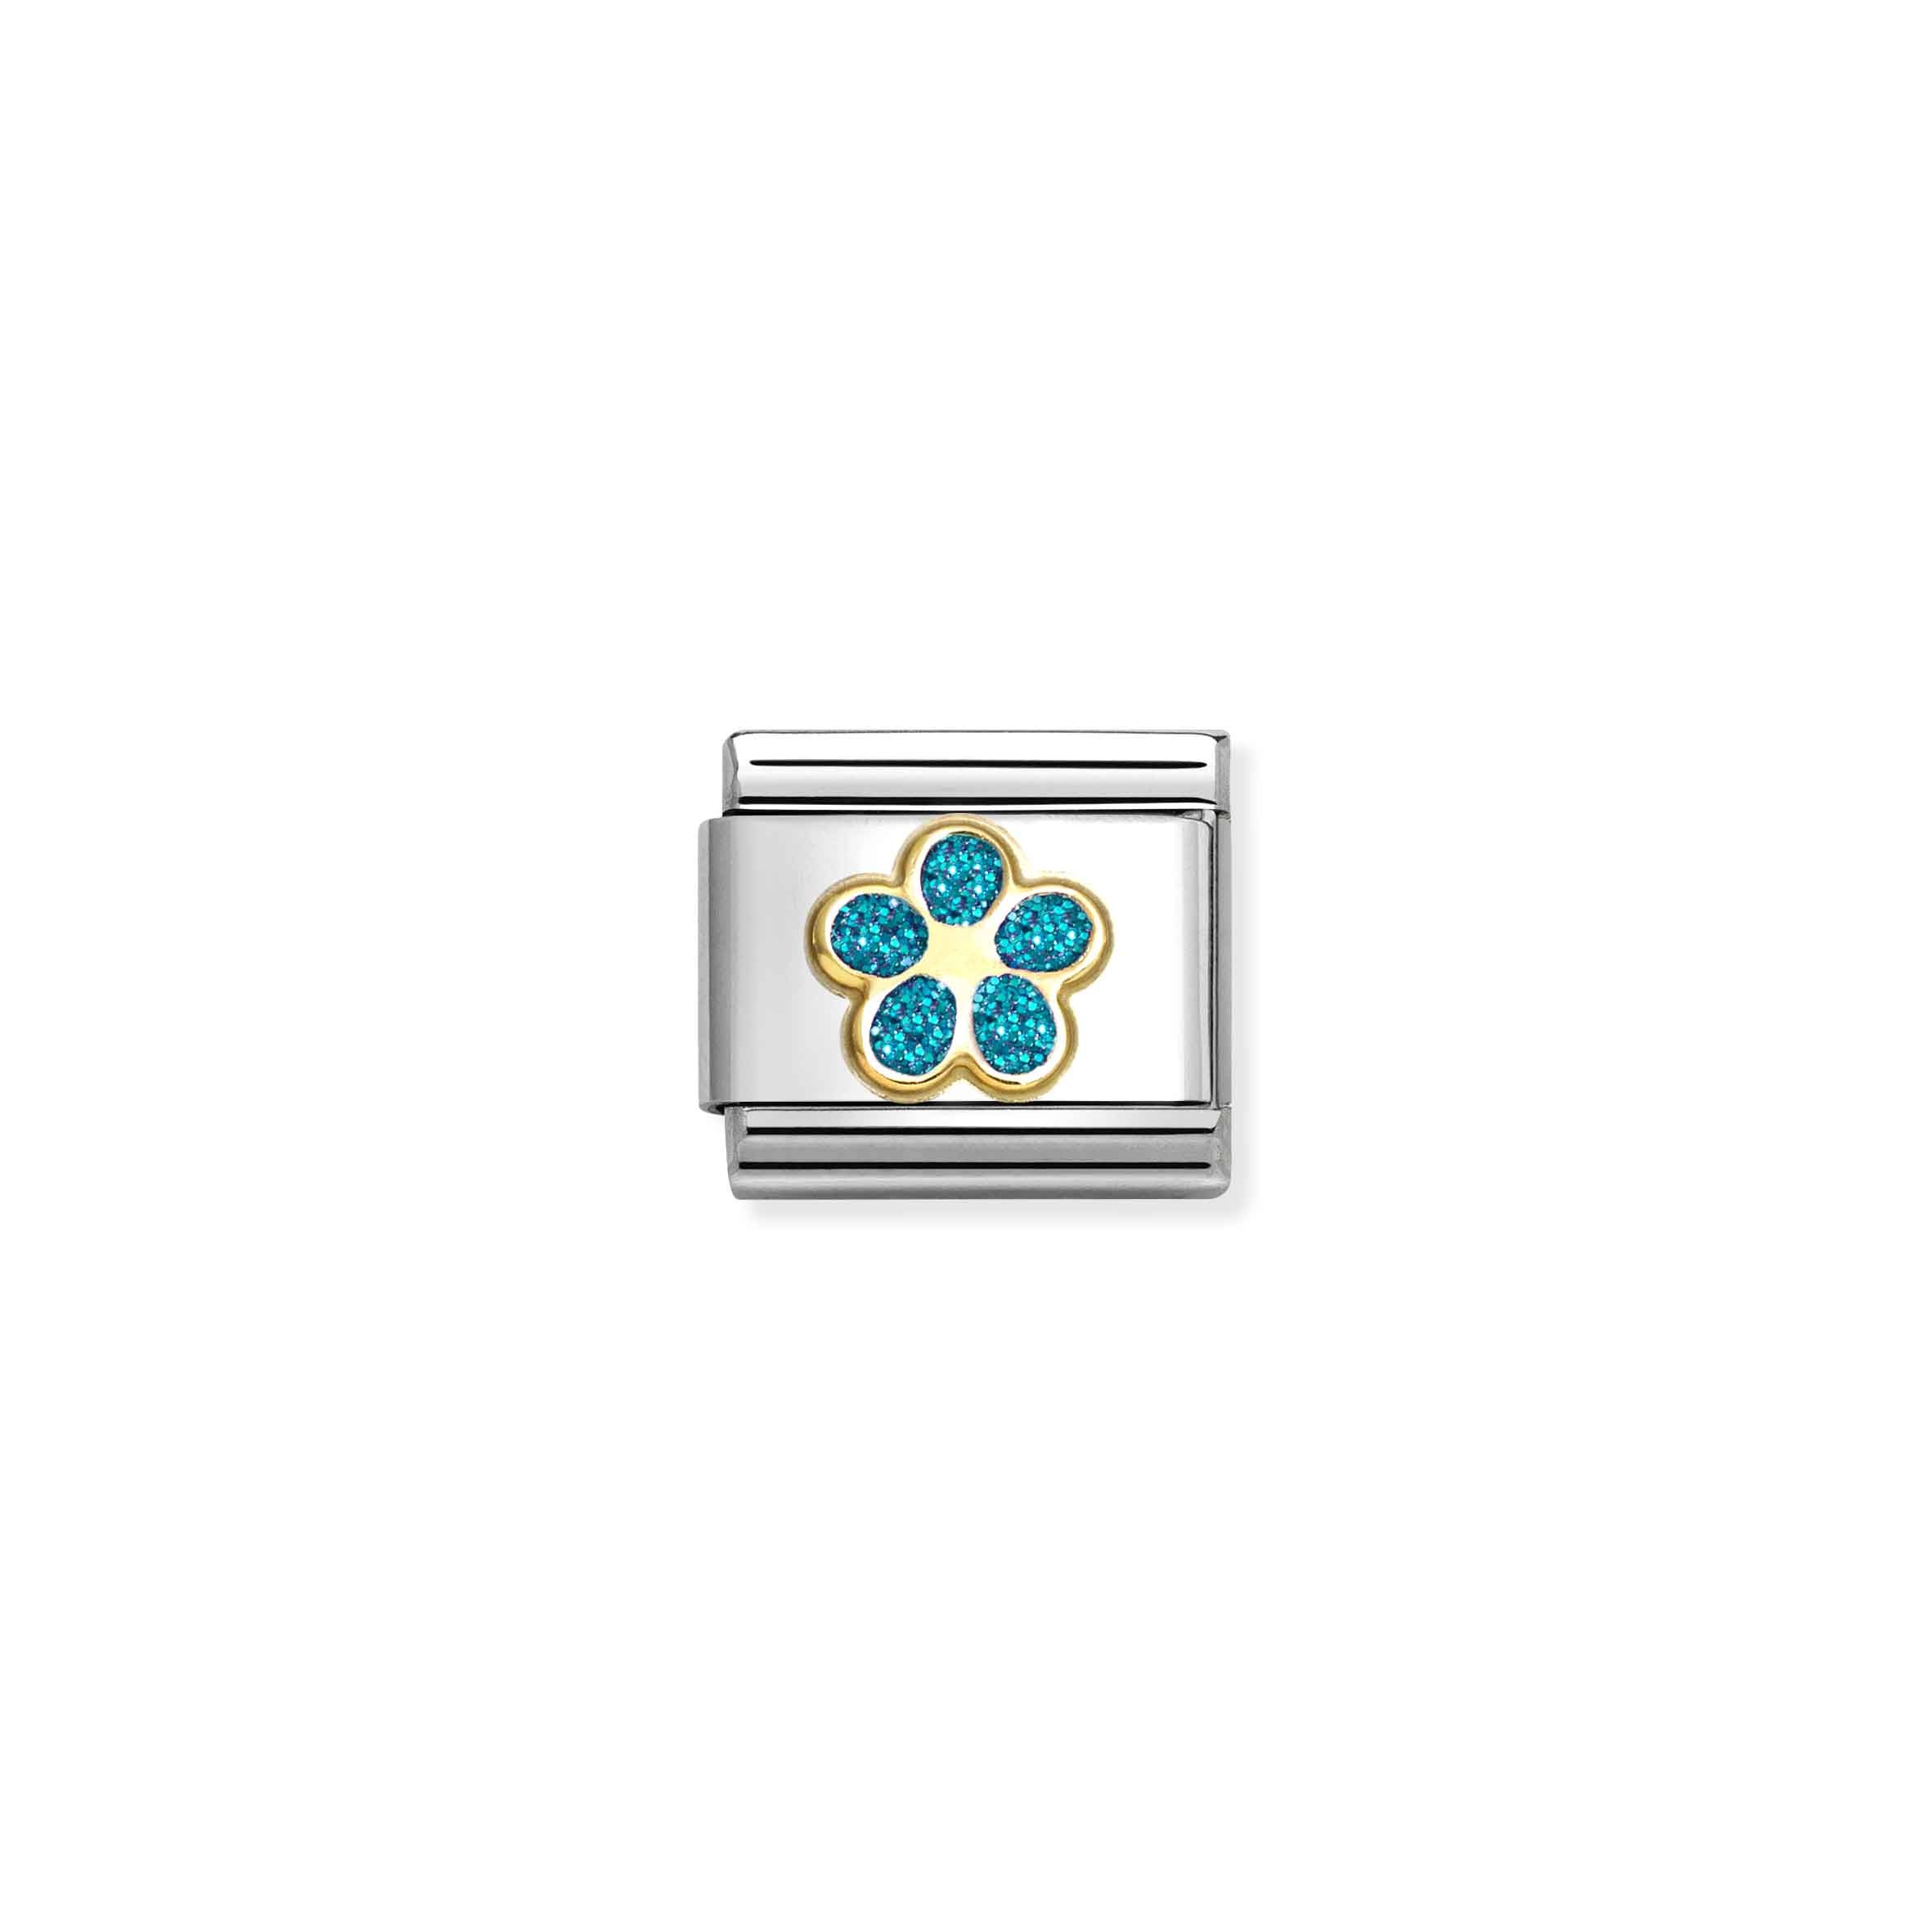 Nomination Yellow Gold Turquoise Glitter Flower Charm